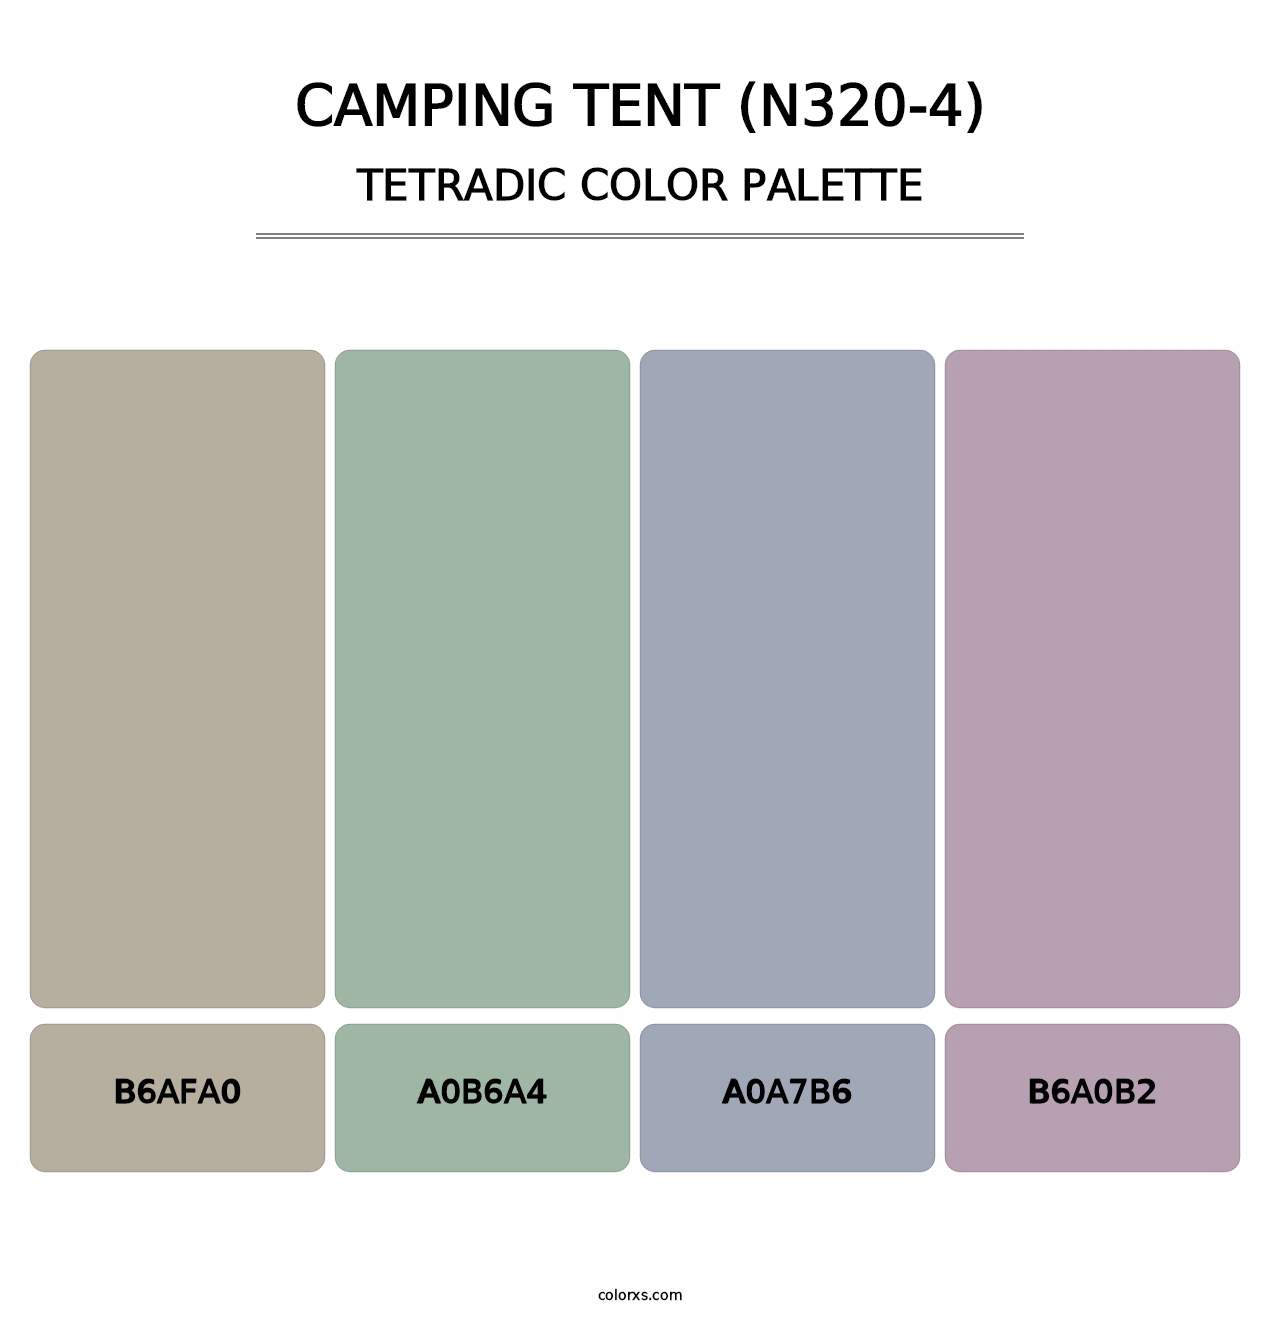 Camping Tent (N320-4) - Tetradic Color Palette